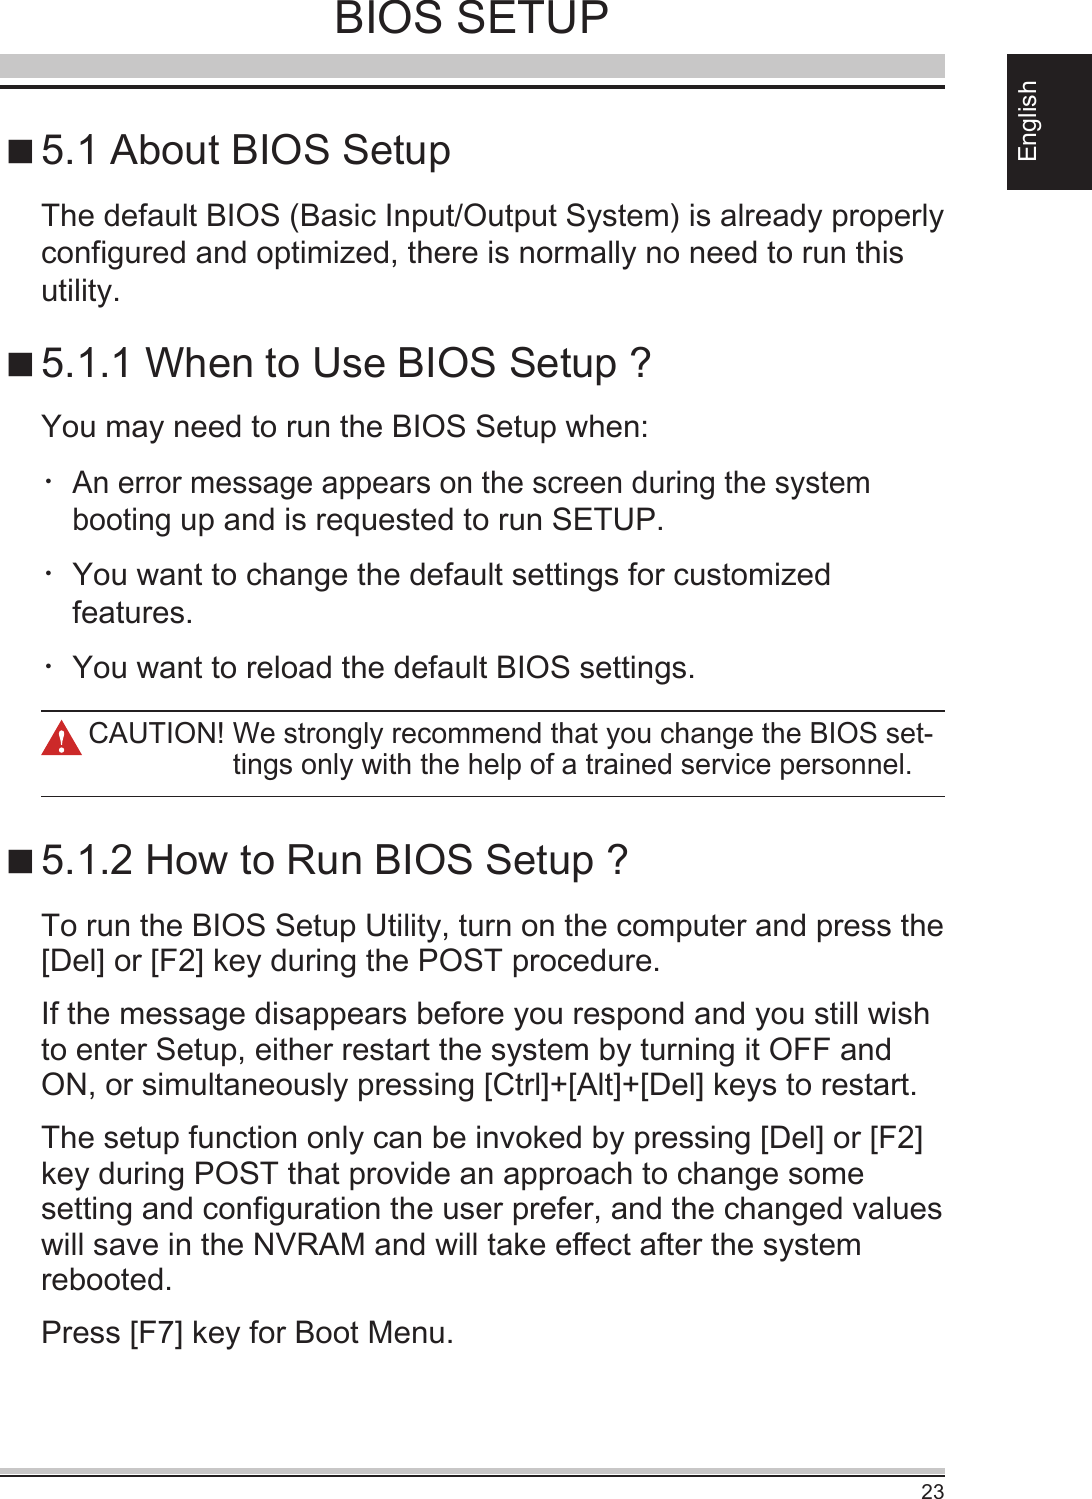 23EnglishBIOS SETUP5.1 About BIOS Setup5.1.1 When to Use BIOS Setup ?5.1.2 How to Run BIOS Setup ?You may need to run the BIOS Setup when:・ An error message appears on the screen during the system booting up and is requested to run SETUP.・ You want to change the default settings for customized features.・You want to reload the default BIOS settings.To run the BIOS Setup Utility, turn on the computer and press the [Del] or [F2] key during the POST procedure.If the message disappears before you respond and you still wish to enter Setup, either restart the system by turning it OFF and ON, or simultaneously pressing [Ctrl]+[Alt]+[Del] keys to restart.The setup function only can be invoked by pressing [Del] or [F2] key during POST that provide an approach to change some setting and conguration the user prefer, and the changed values will save in the NVRAM and will take eect after the system rebooted. Press [F7] key for Boot Menu.The default BIOS (Basic Input/Output System) is already properly congured and optimized, there is normally no need to run this utility.CAUTION!  We strongly recommend that you change the BIOS set-tings only with the help of a trained service personnel.